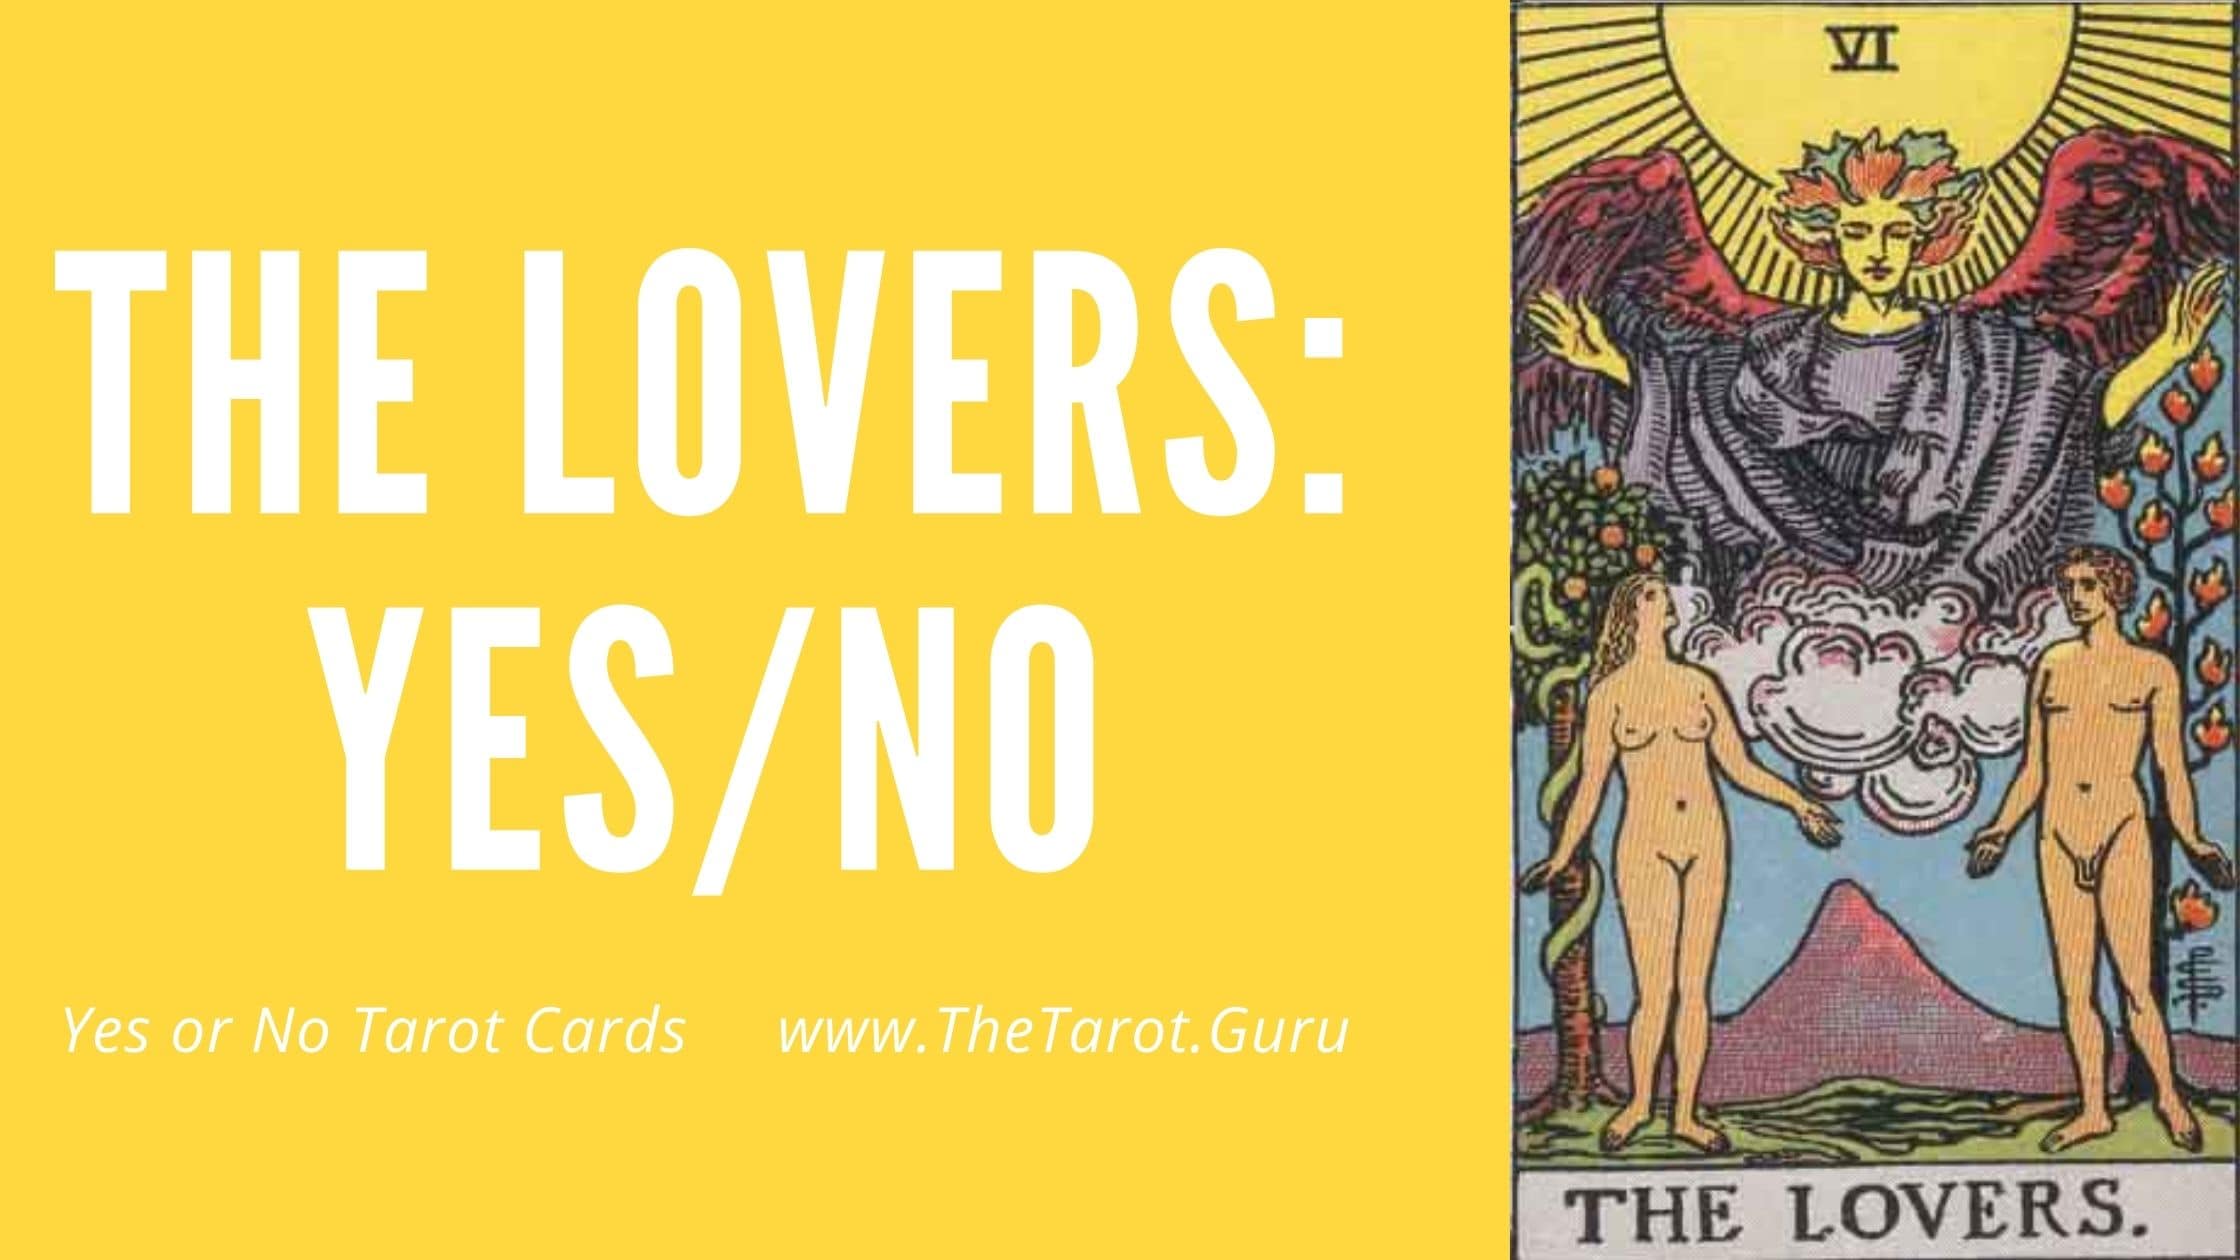 The Lovers Yes or No Tarot